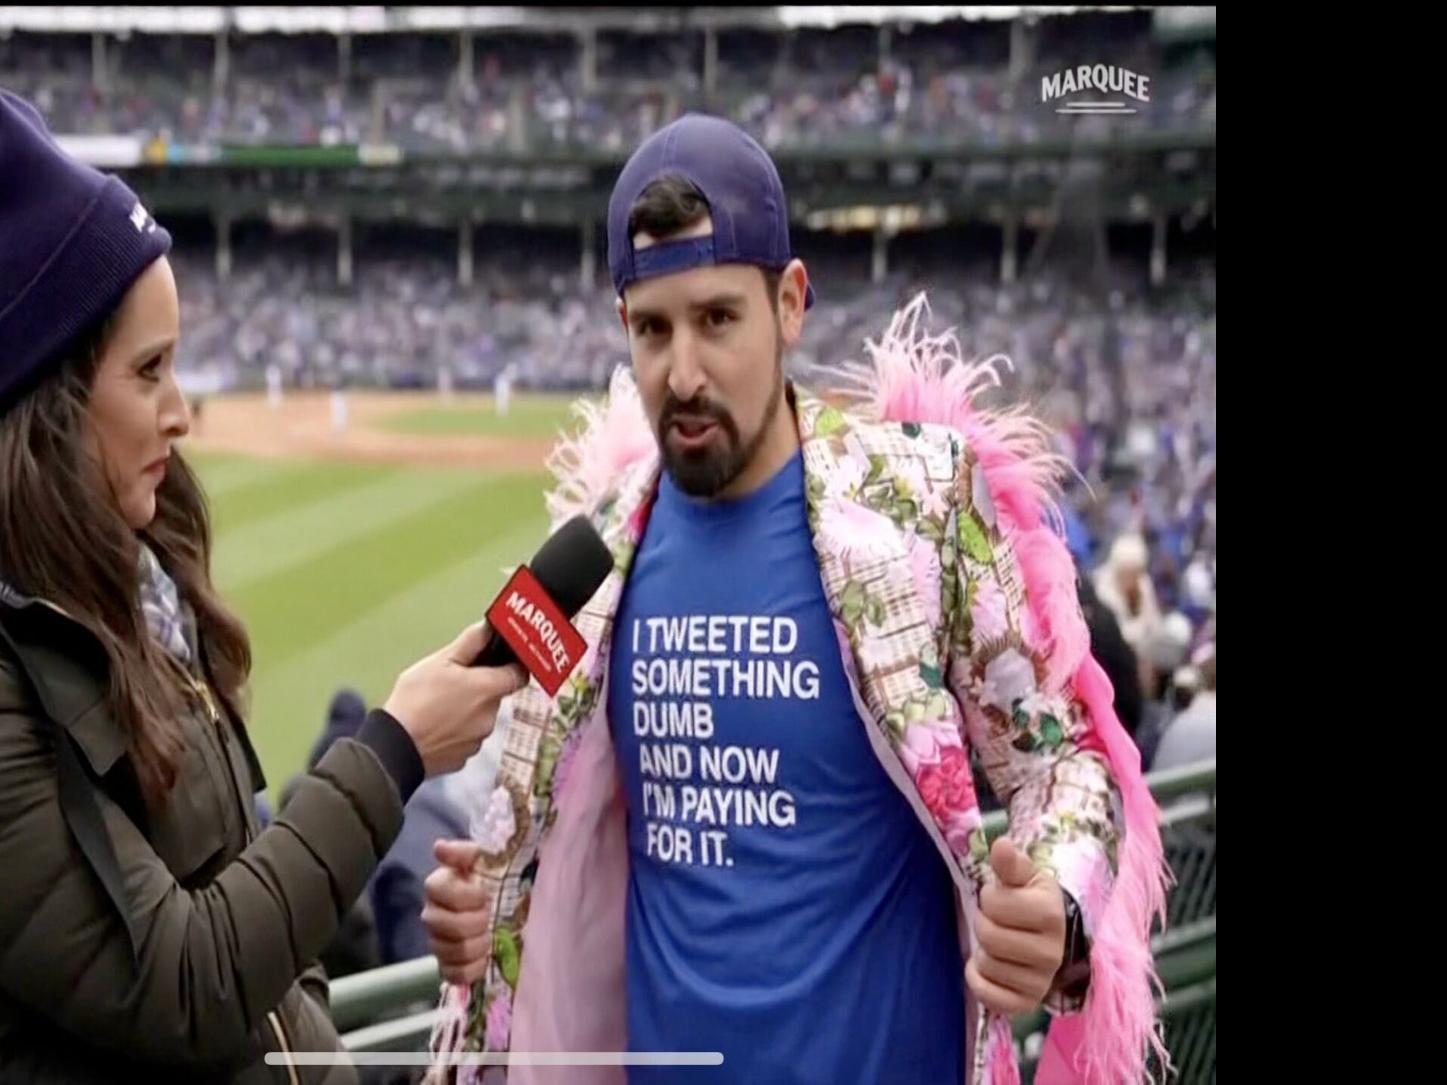 cubs game, what to wear to a cubs game, what to wear to a baseball